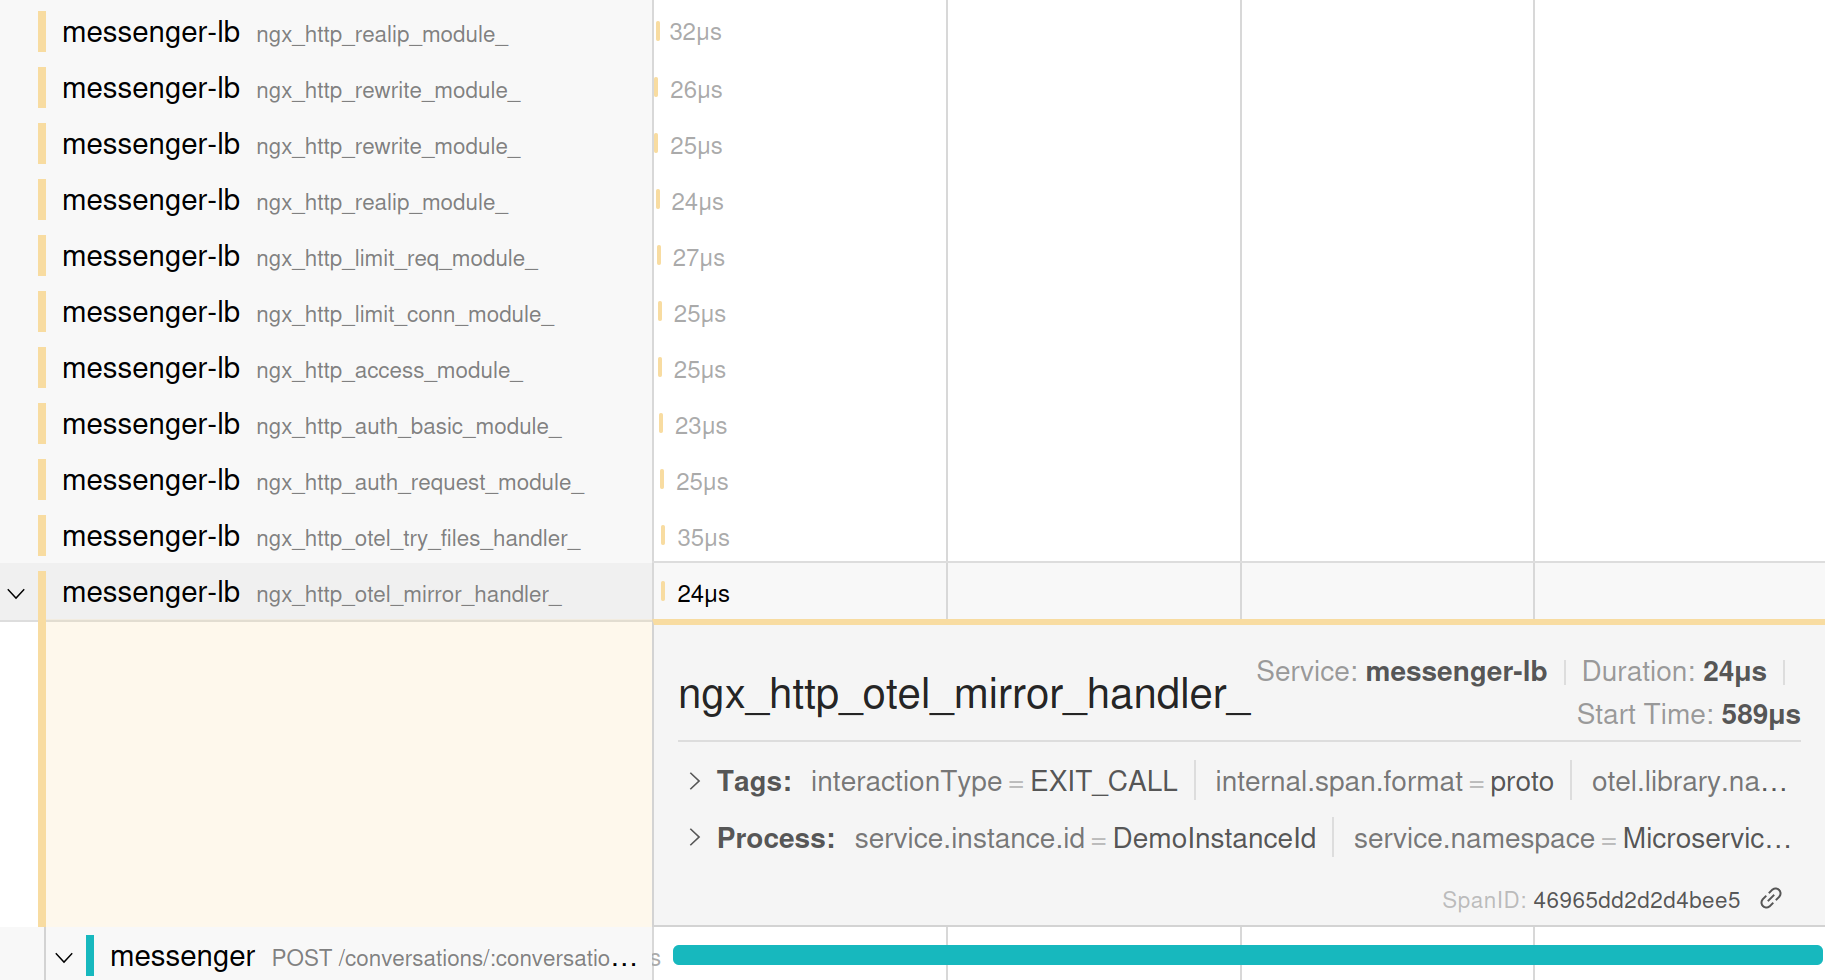 Screenshot of Jaeger GUI showing spans in the NGINX (messenger-lb) section of the trace